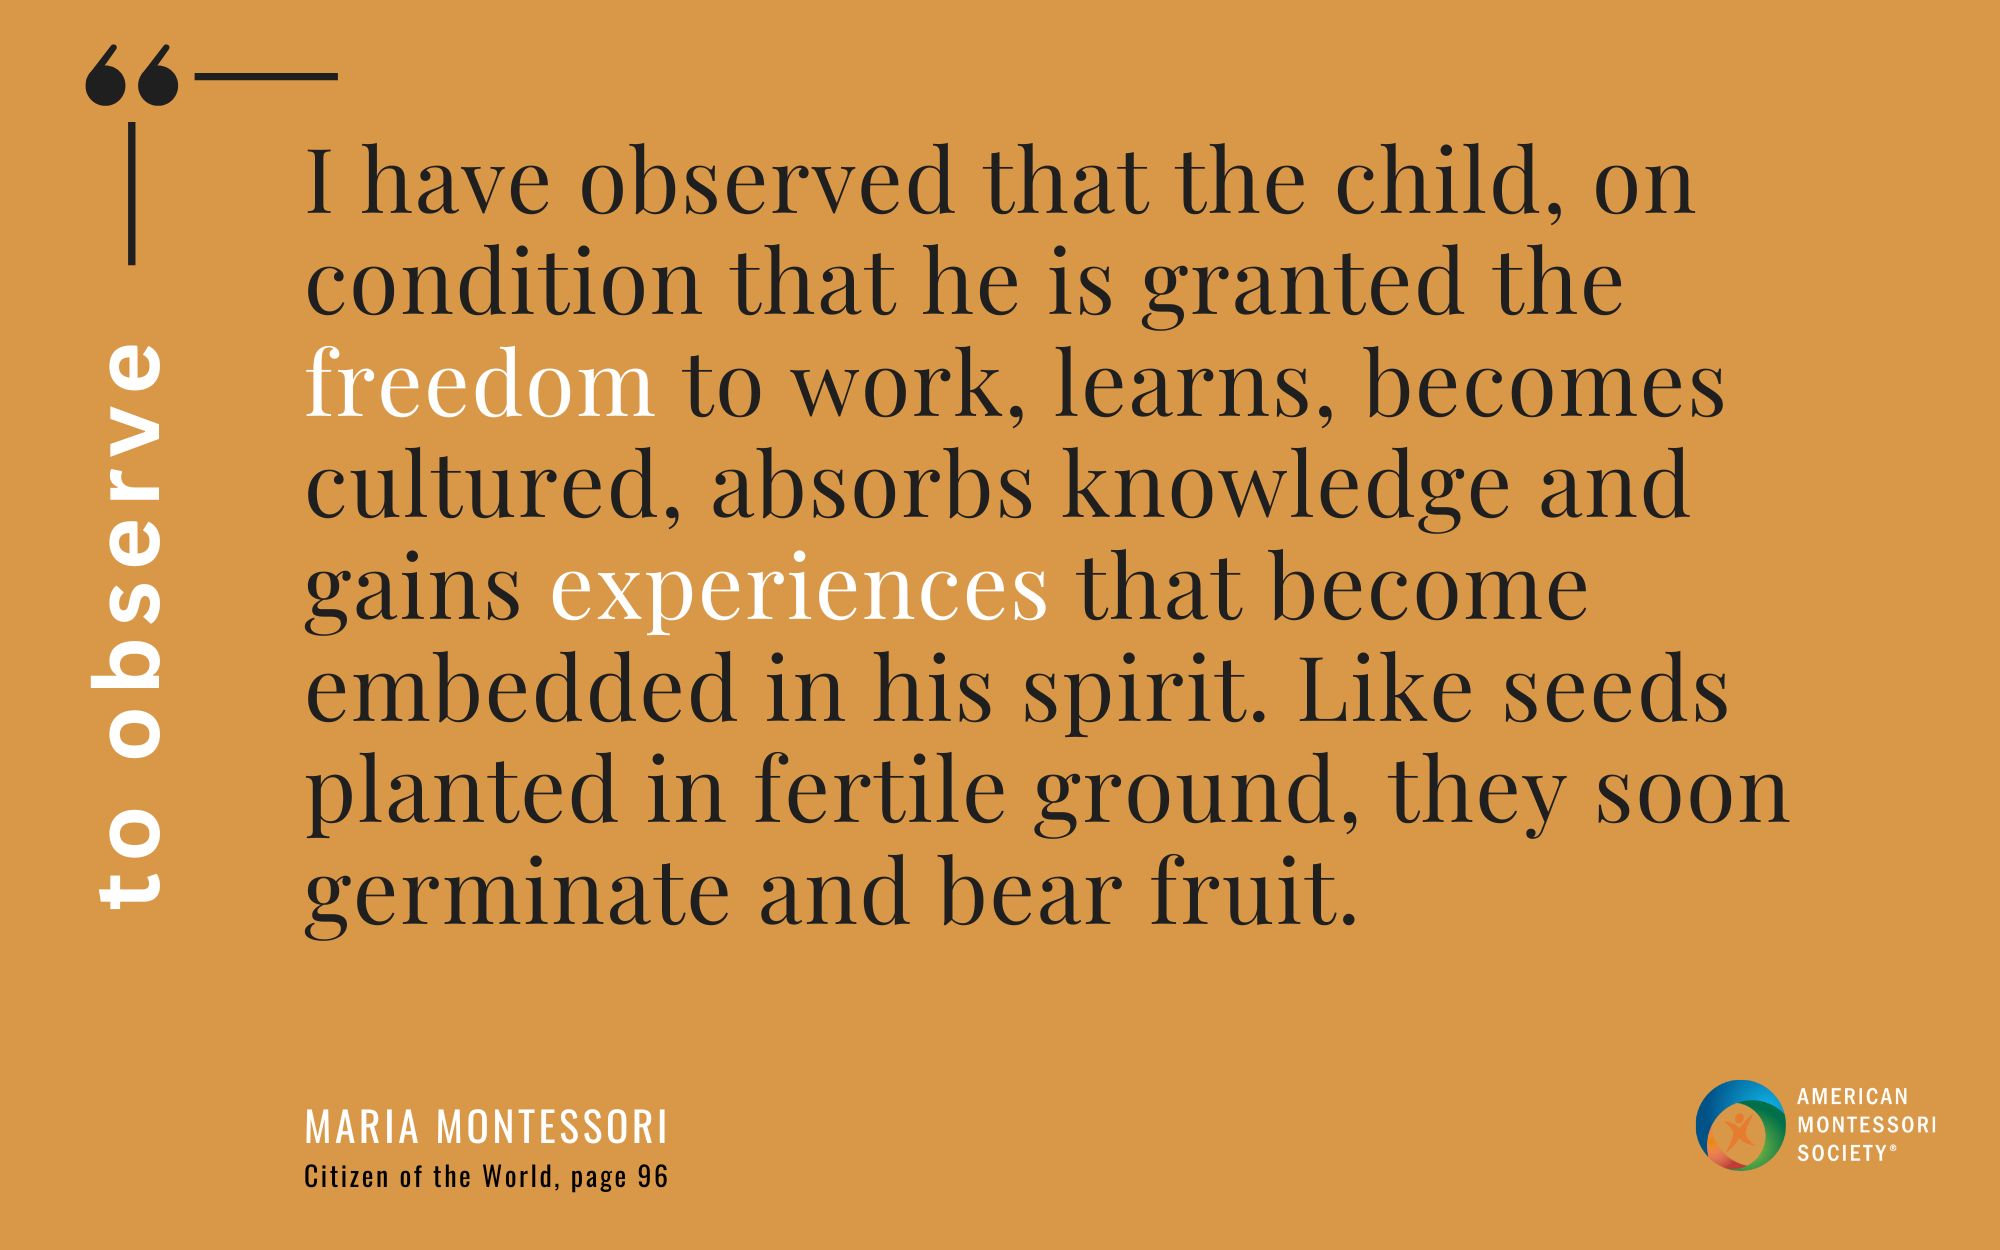 I have observed that the child, on condition that he is granted the freedom to work, learns, becomes cultured, absorbs knowledge and gains experiences that become embedded in his spirit. Like seeds planted in fertile ground, they soon germinate and bear fruit.